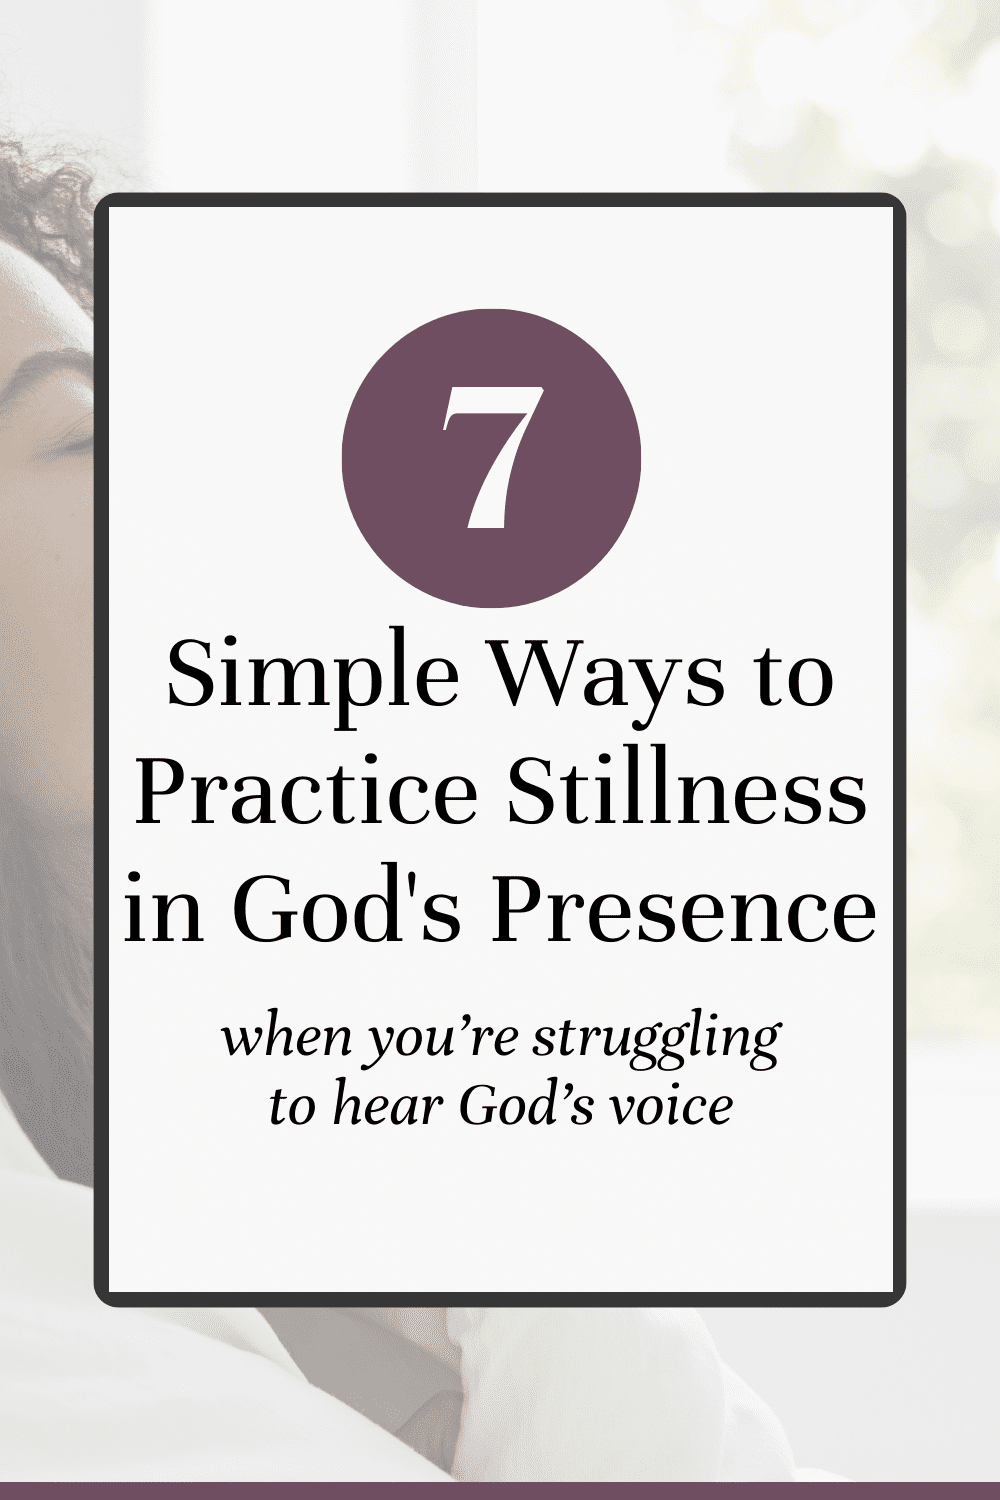 Are you struggling to hear from God? Learn seven ways to practice stillness with God so you can experience His presence. Plus, tips about creative worship ideas, journaling and embracing regular sabbath.